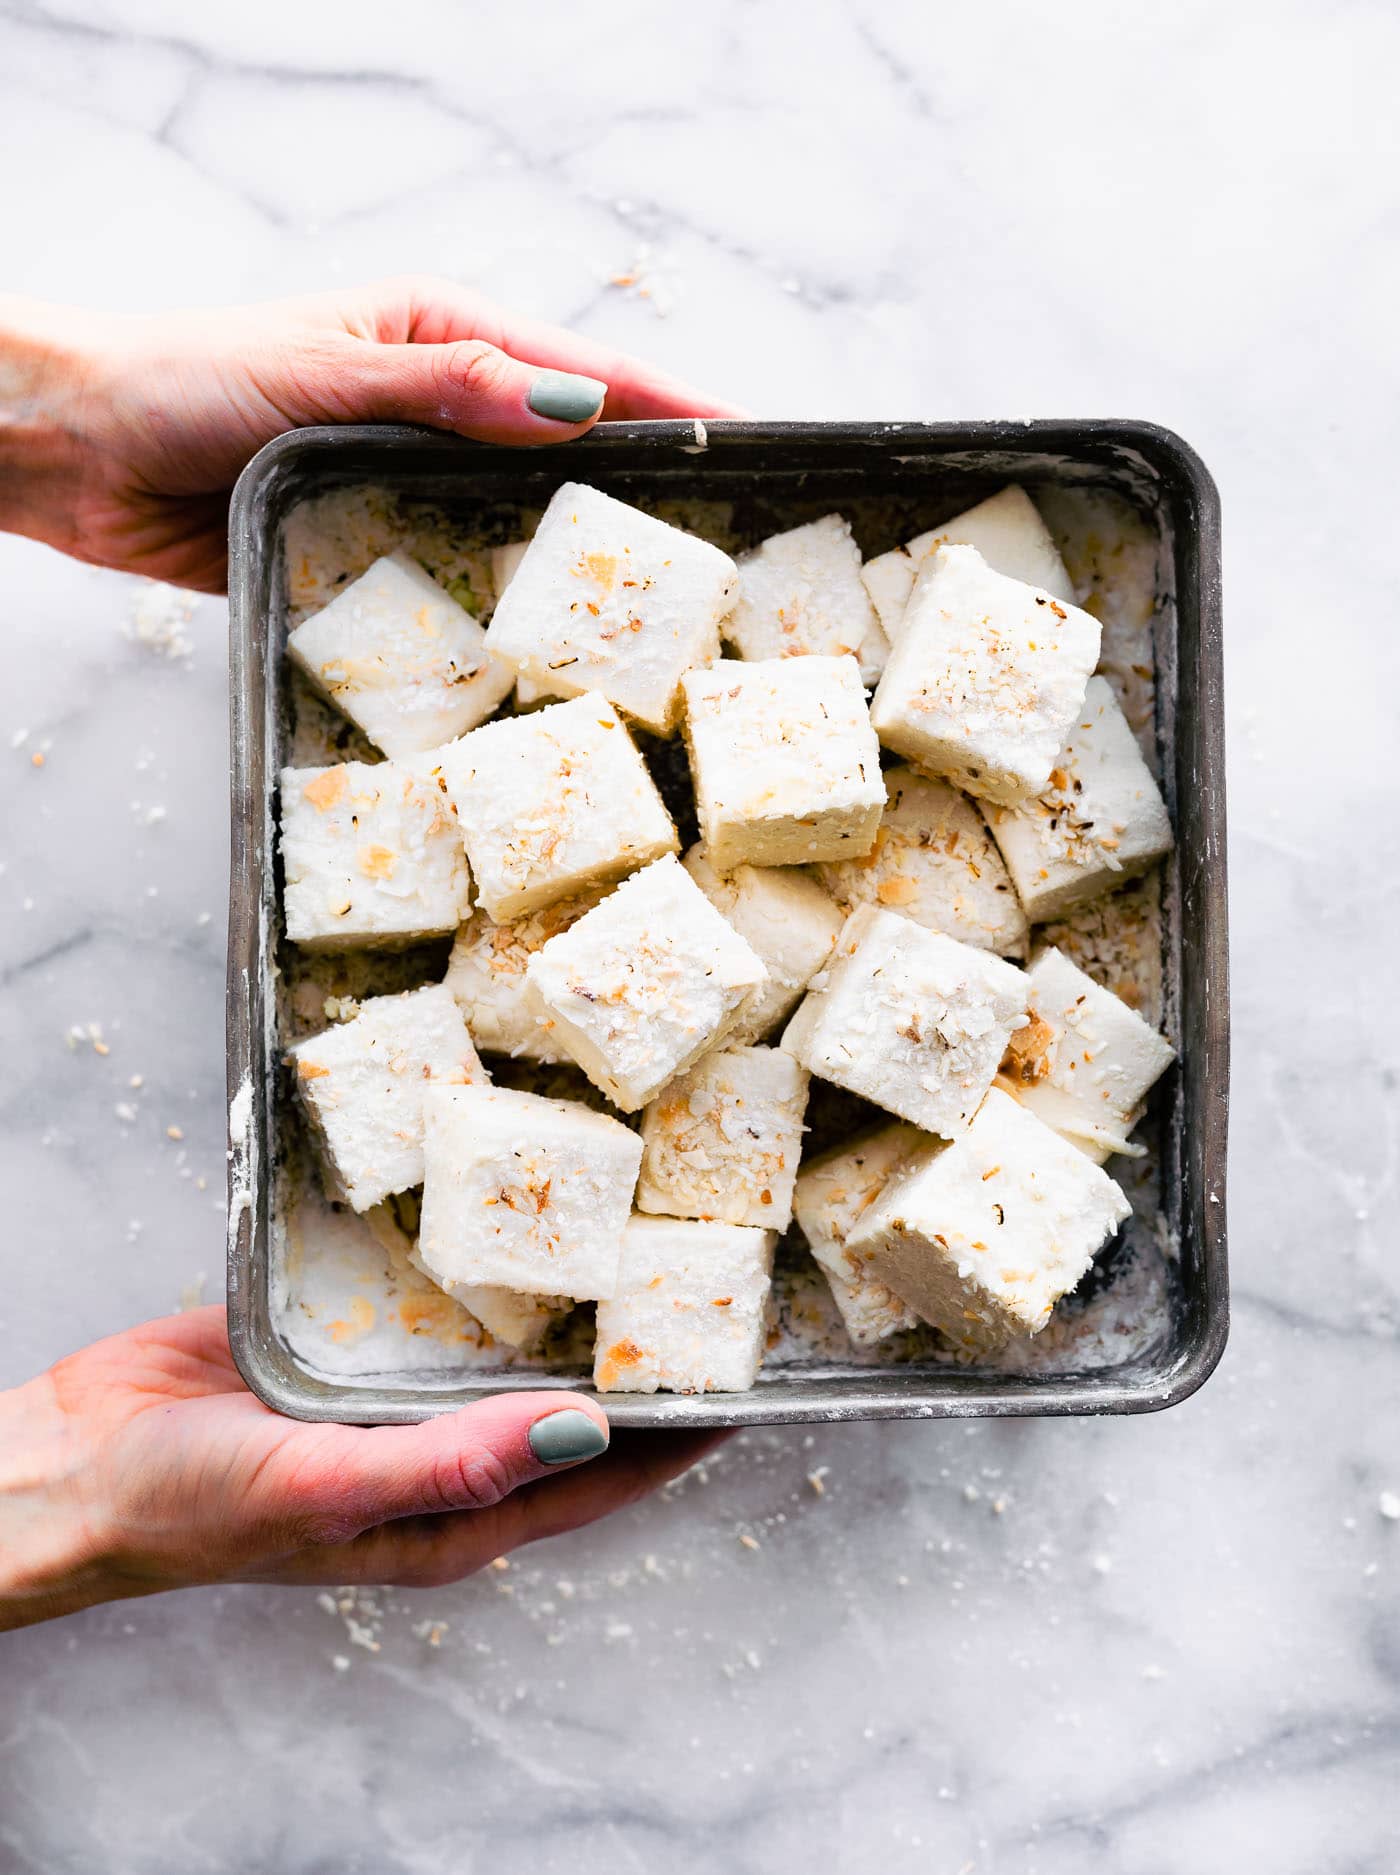 An overhead image of homemade marshmallows cut and tossed into the baking dish.